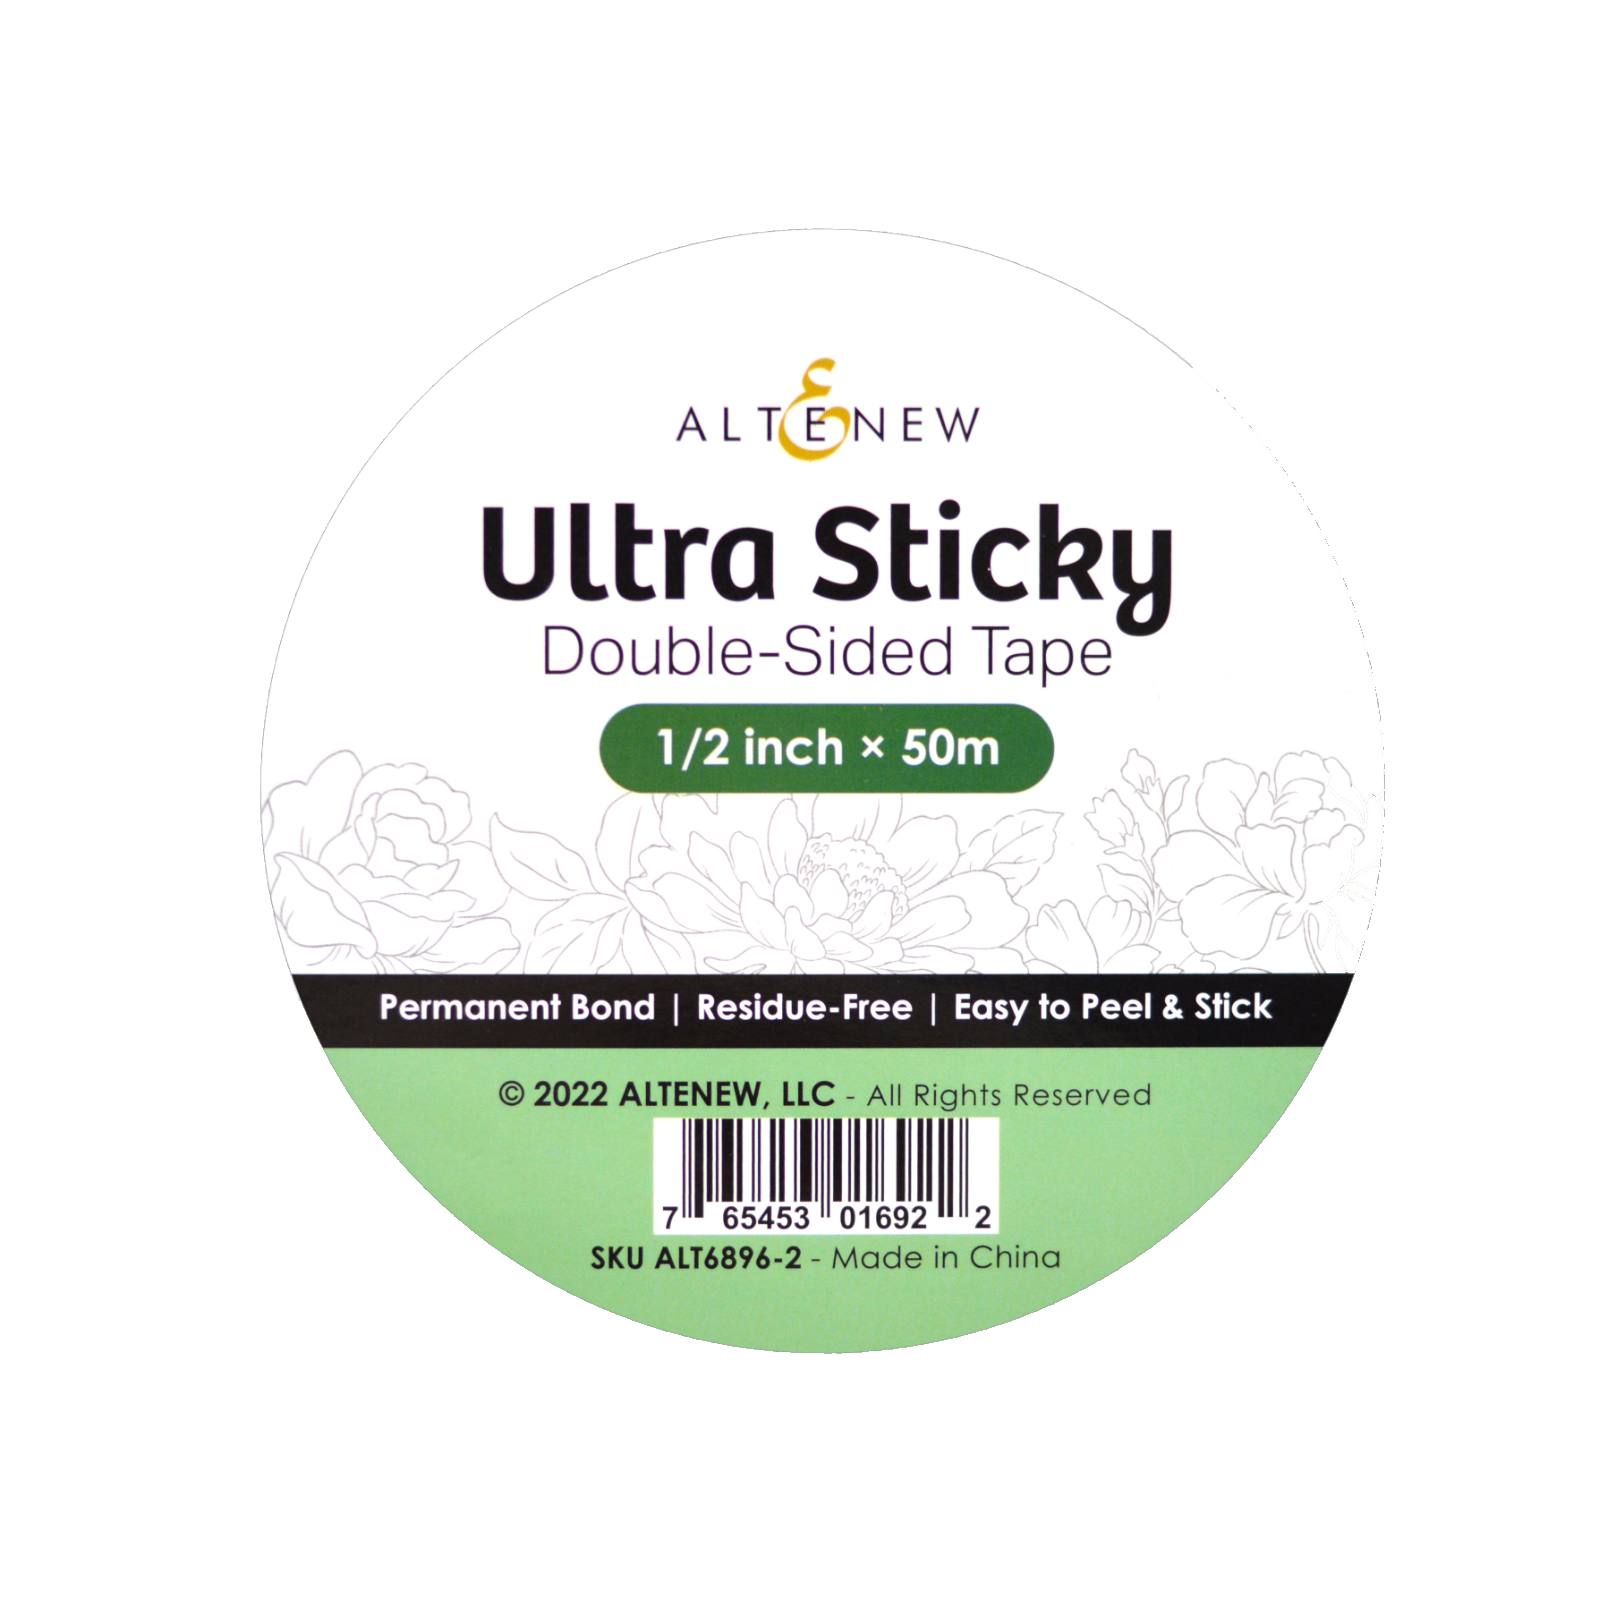 Ultra Sticky Double Sided Tape (1/2 inch × 50m)